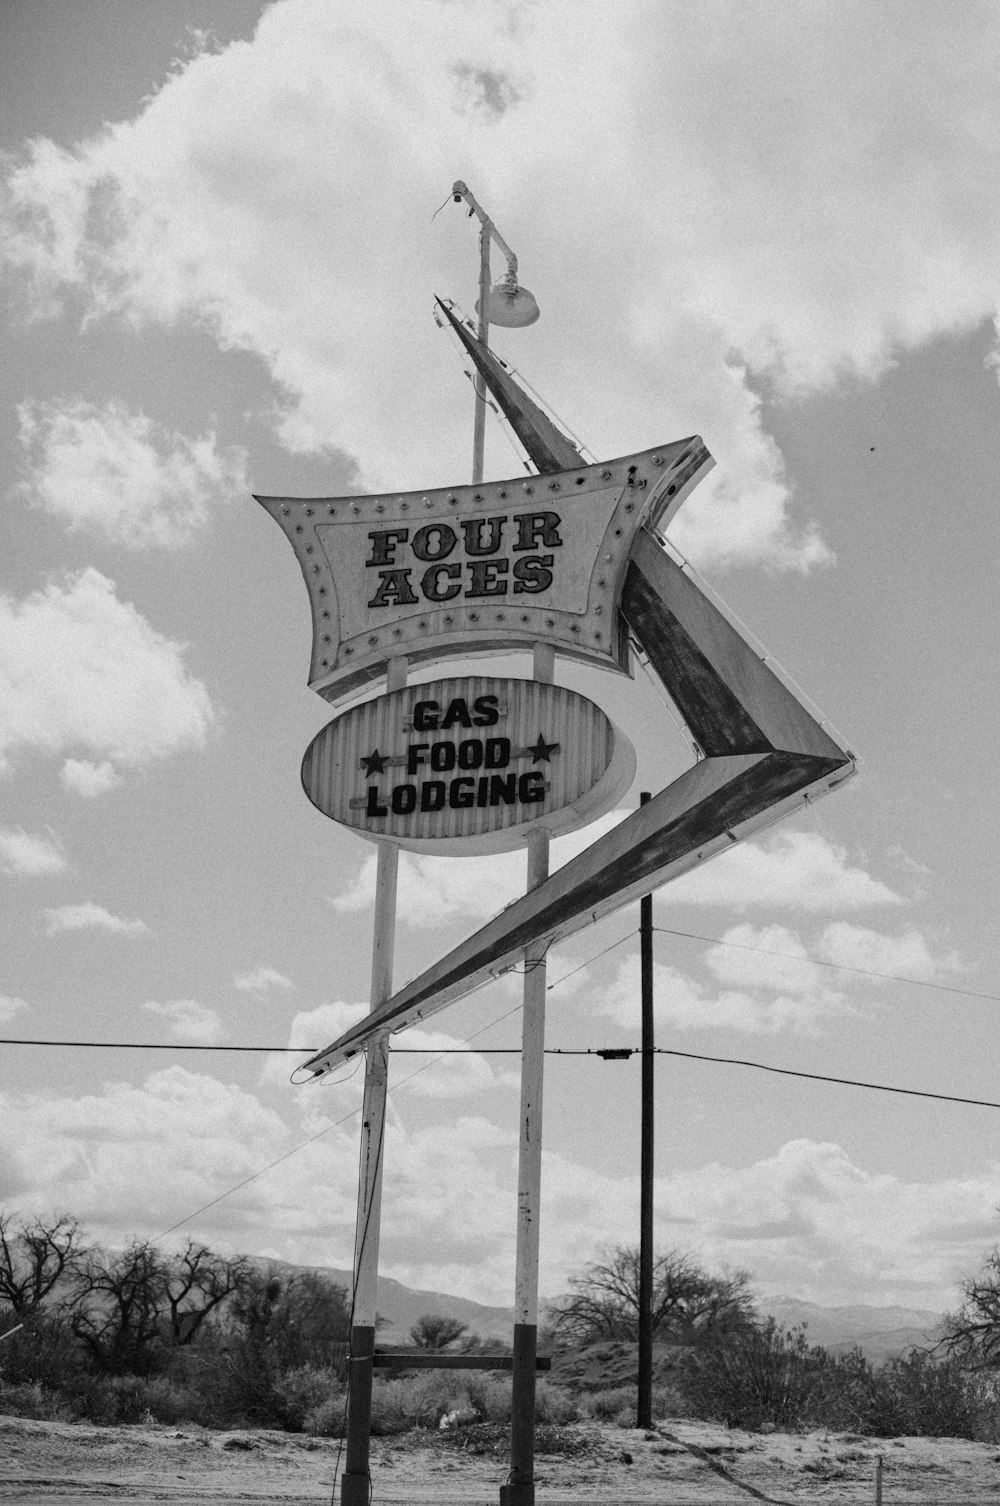 a black and white photo of a four ages sign